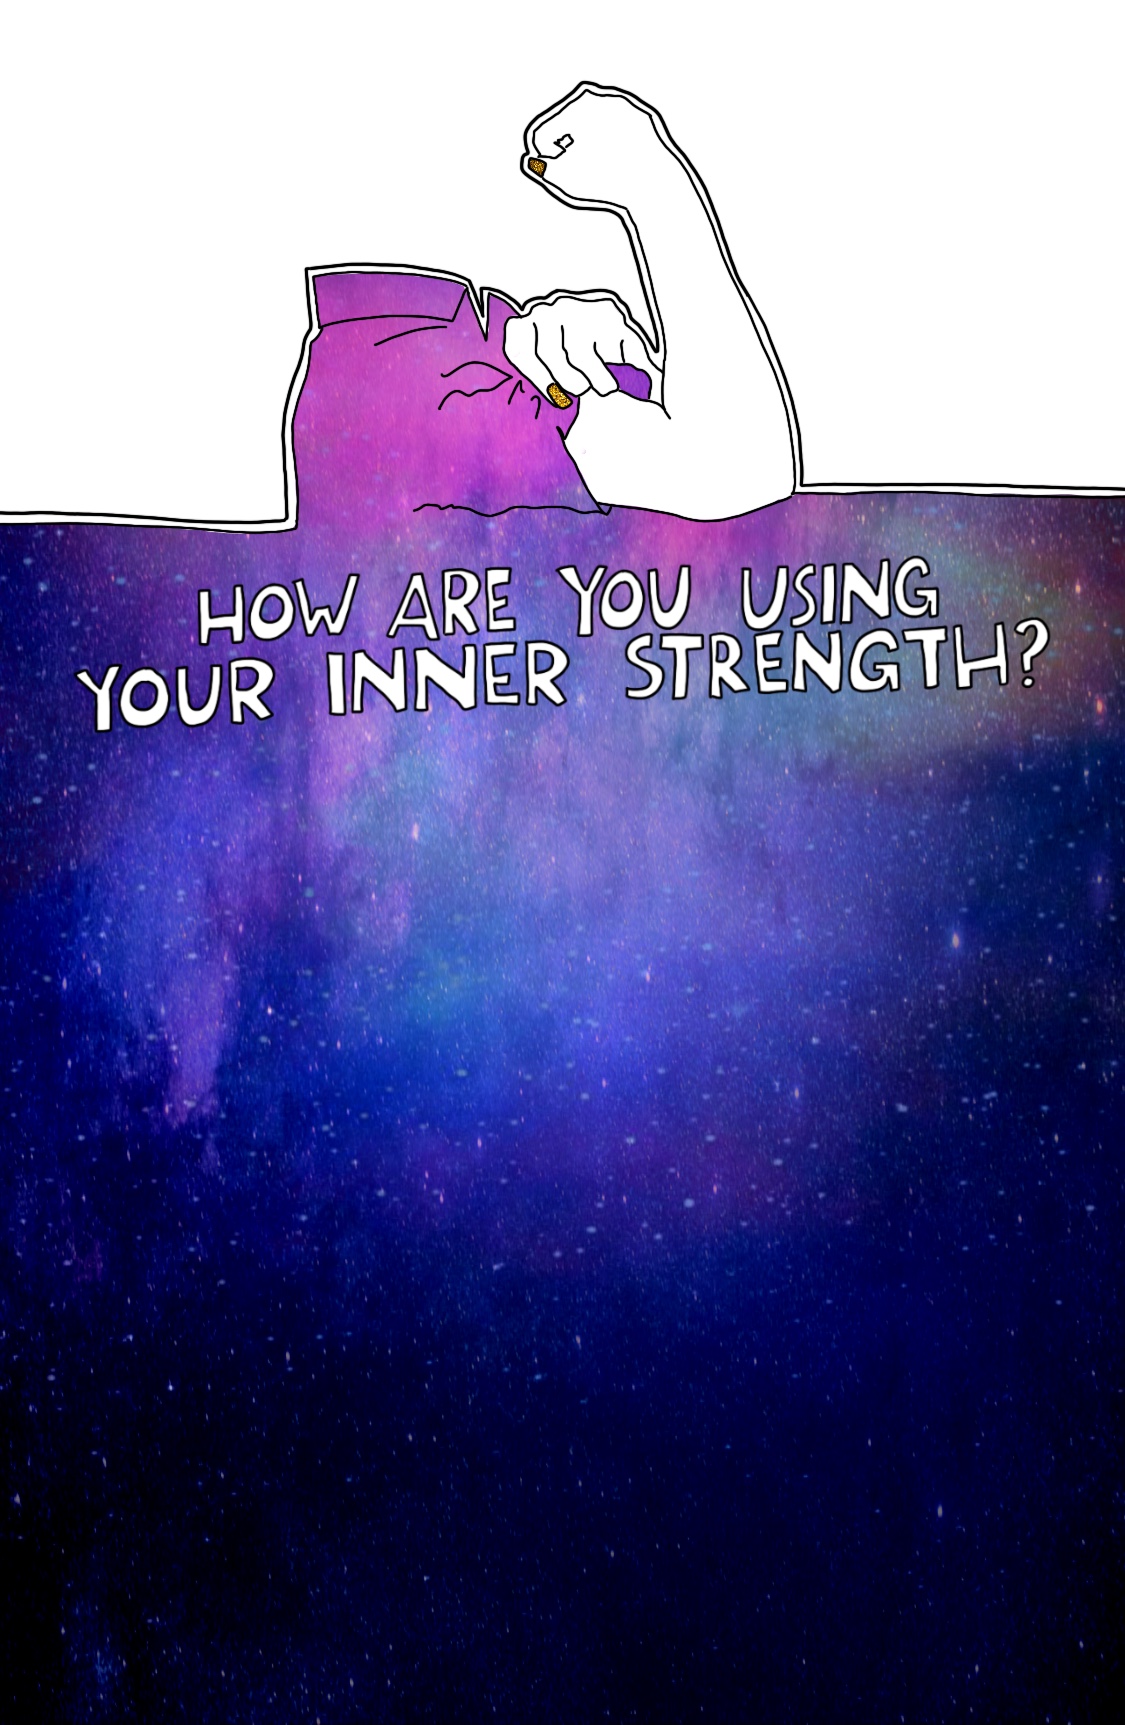 Journal Prompt: How are you using your inner strength?